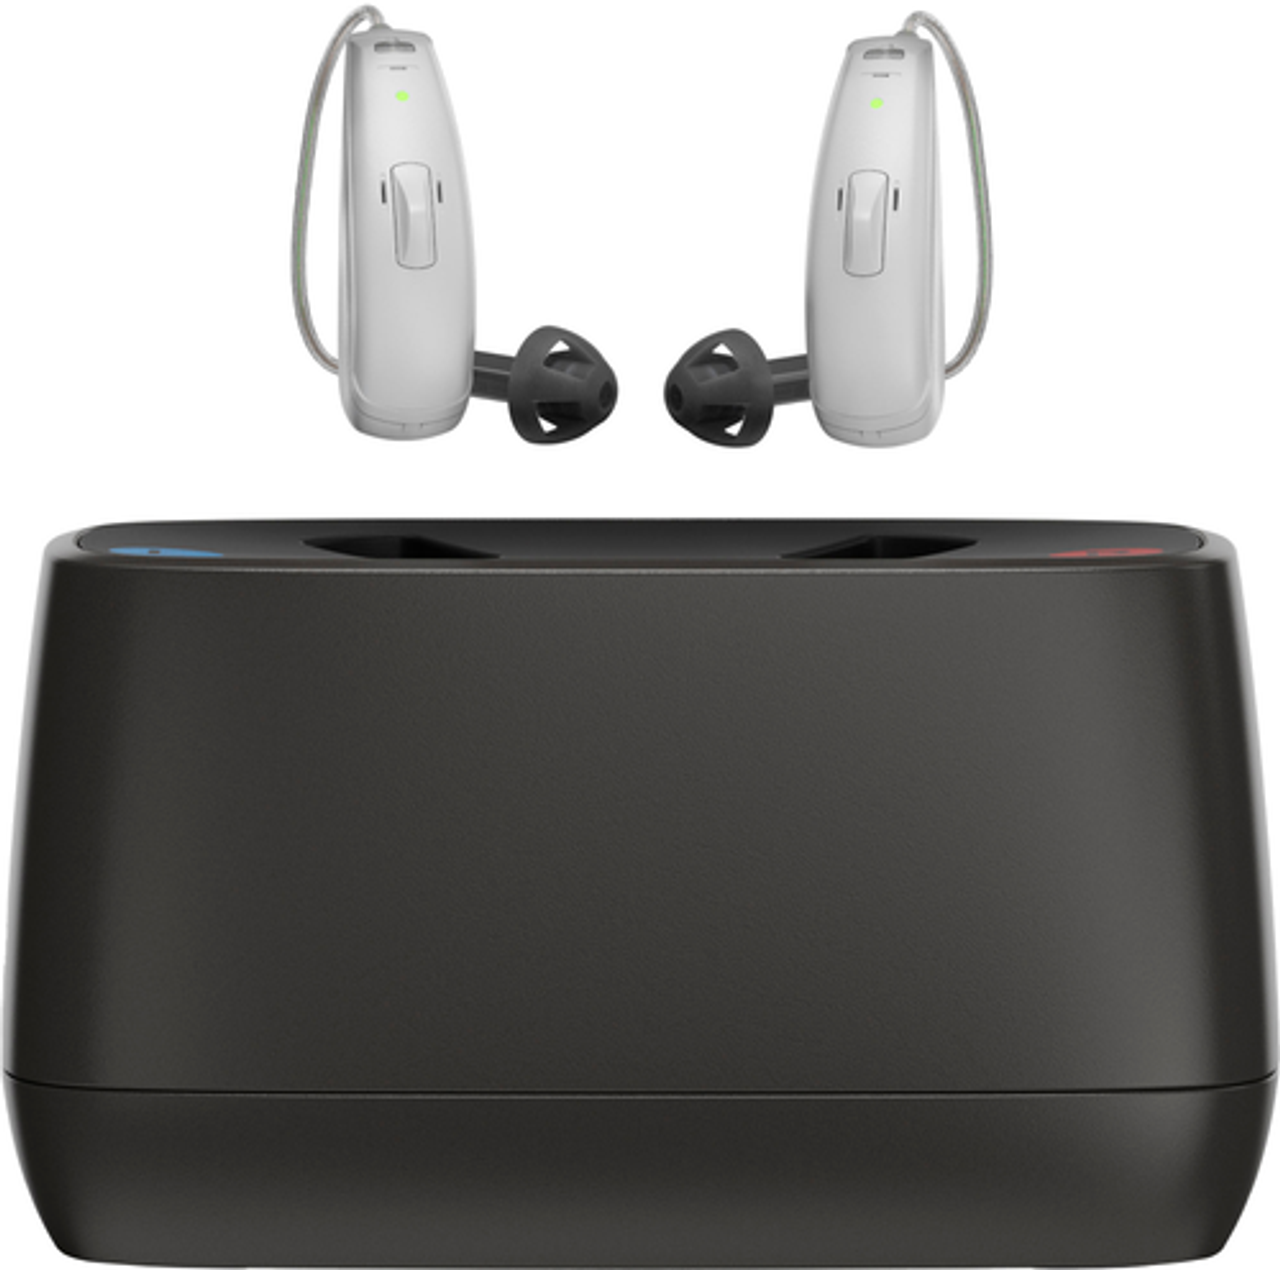 Jabra - Enhance Select 50R Medical Grade Hearing Aid with Virtual Personalized Audiology Care - Gray